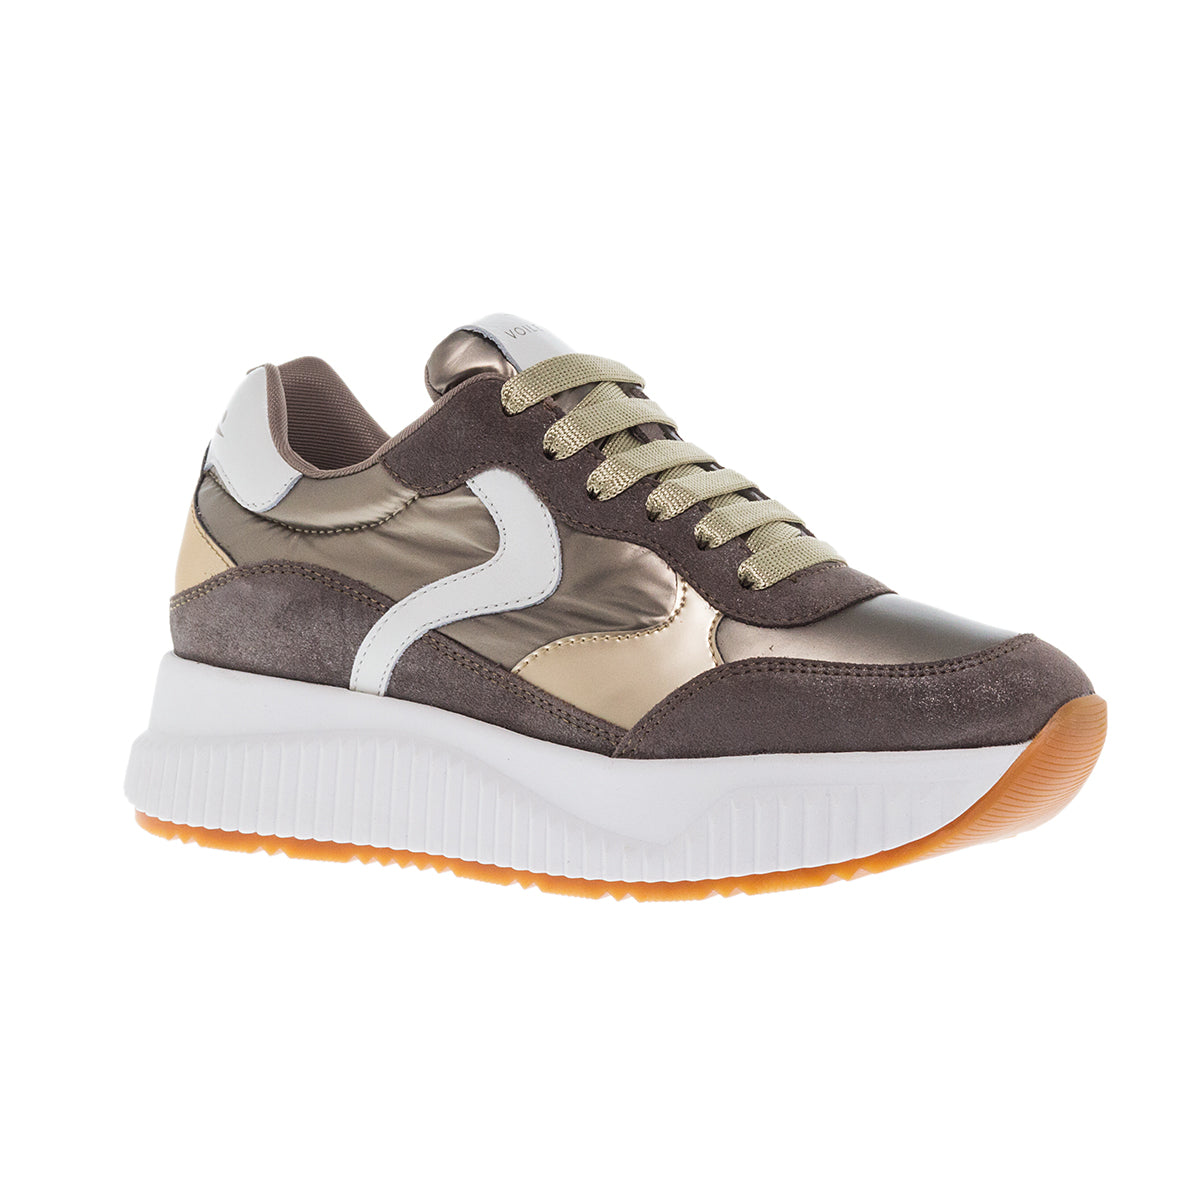 SNEAKERS JINNIE 2D29 TAUPE SUEDE